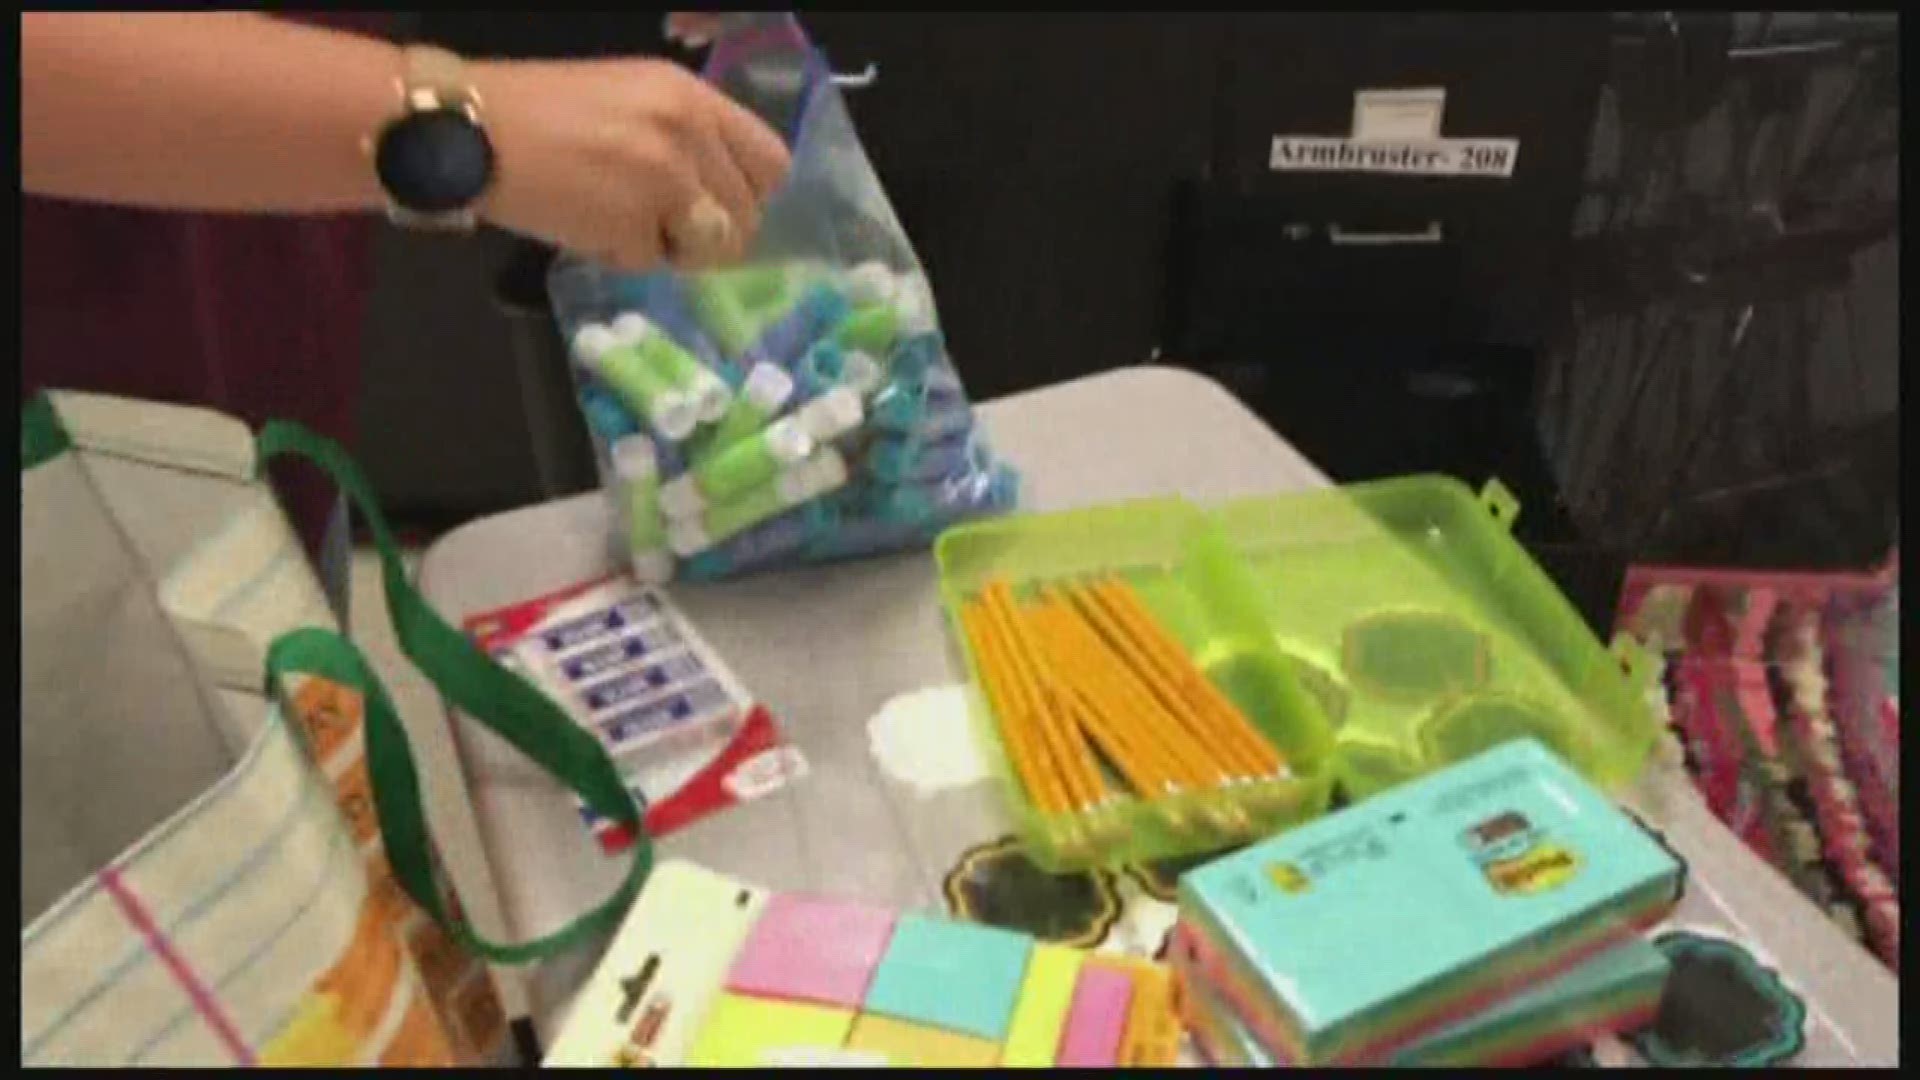 The cost of school supplies is adding up for teachers paying for them out of their own pockets.